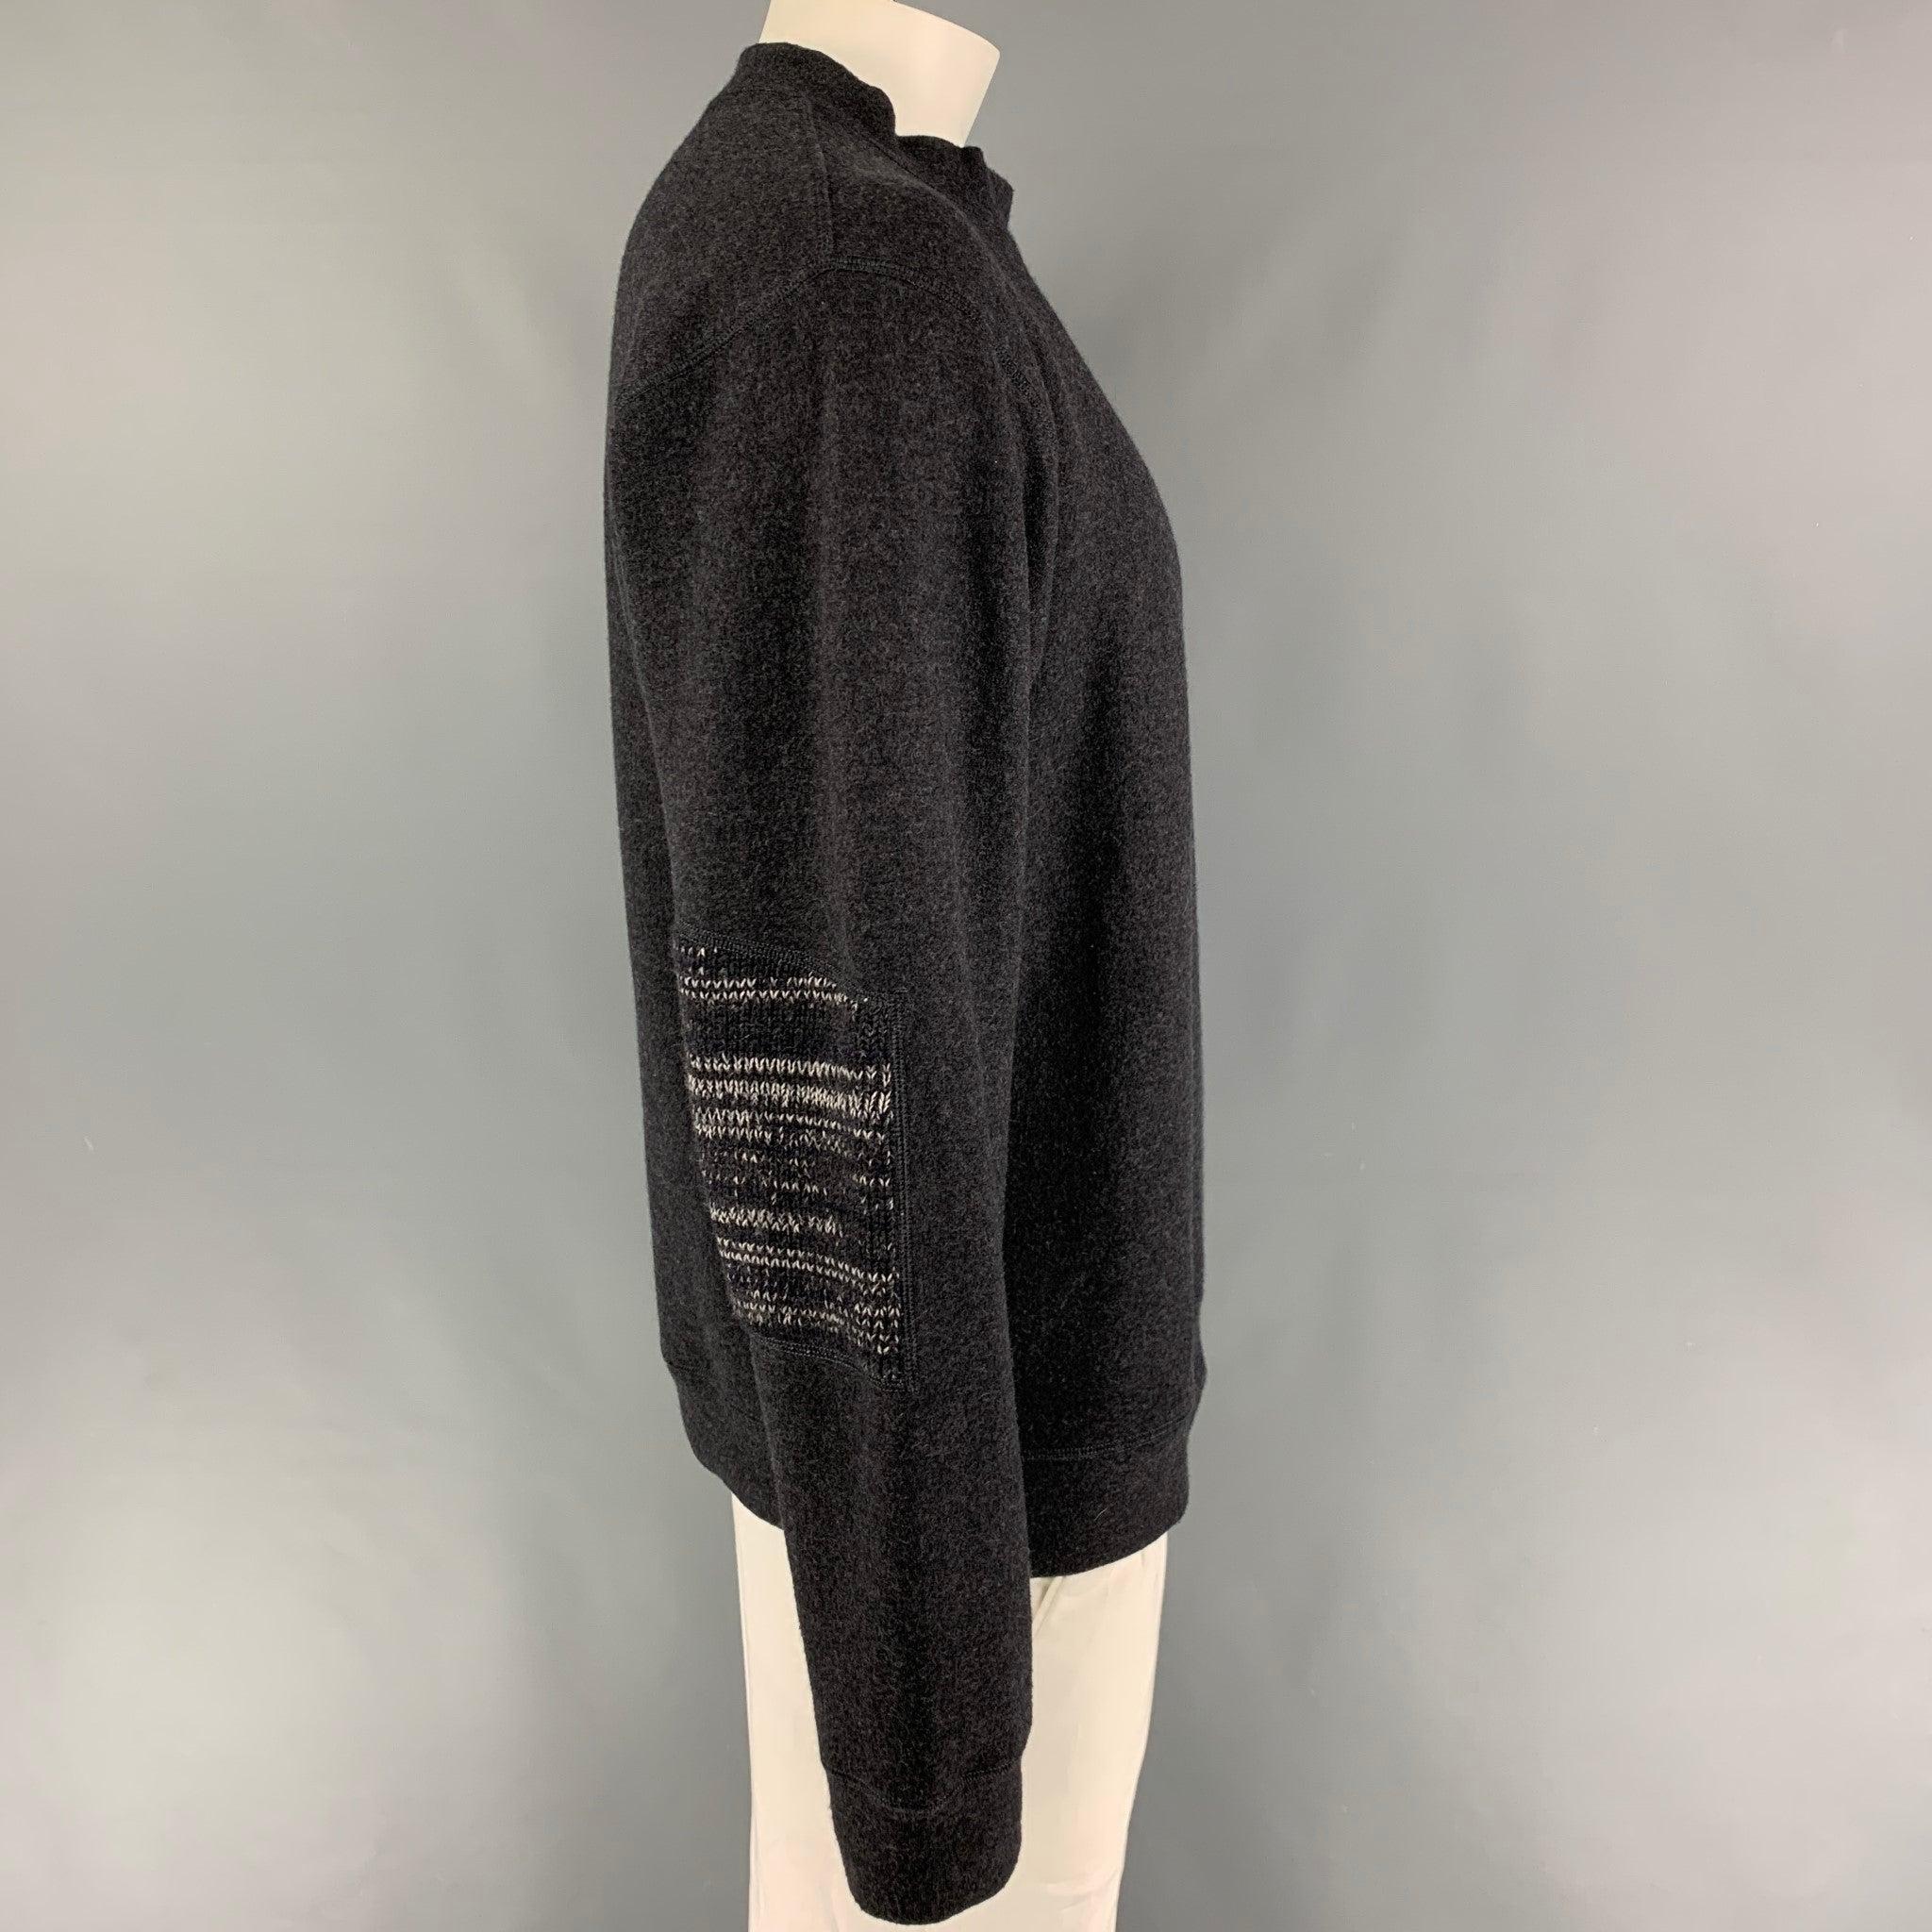 GIORGIO ARMANI sweater comes in a gray wool 
 featuring a mock neck and knitted elbow details. Made in Italy.
 Very Good
 Pre-Owned Condition. 
 

 Marked:  52 
 

 Measurements: 
  
 Shoulder: 22 inches Chest:
 42 inches Sleeve: 28 inches Length: